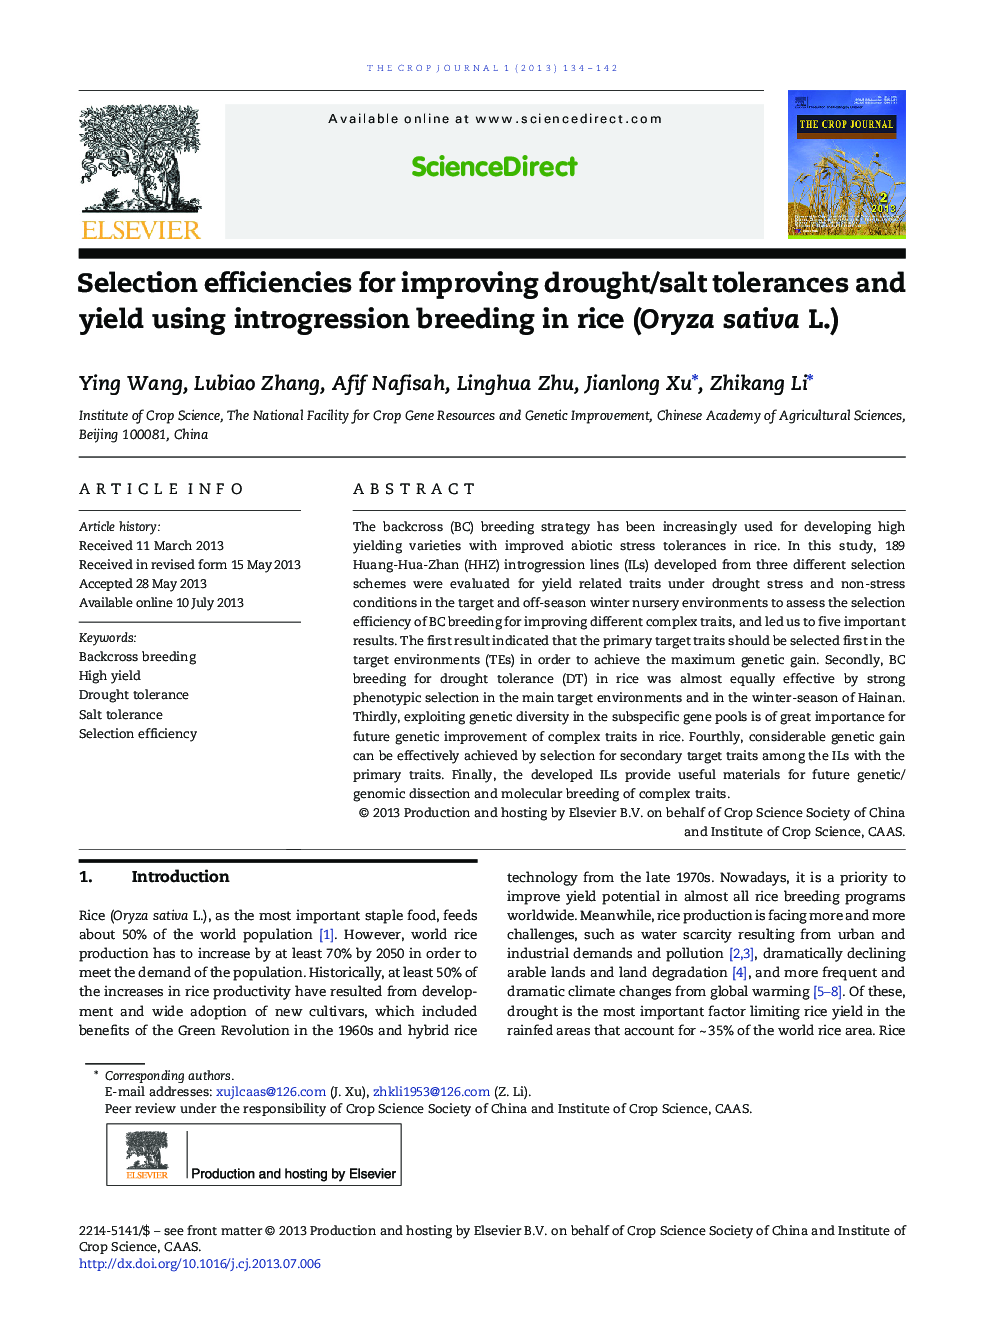 Selection efficiencies for improving drought/salt tolerances and yield using introgression breeding in rice (Oryza sativa L.) 